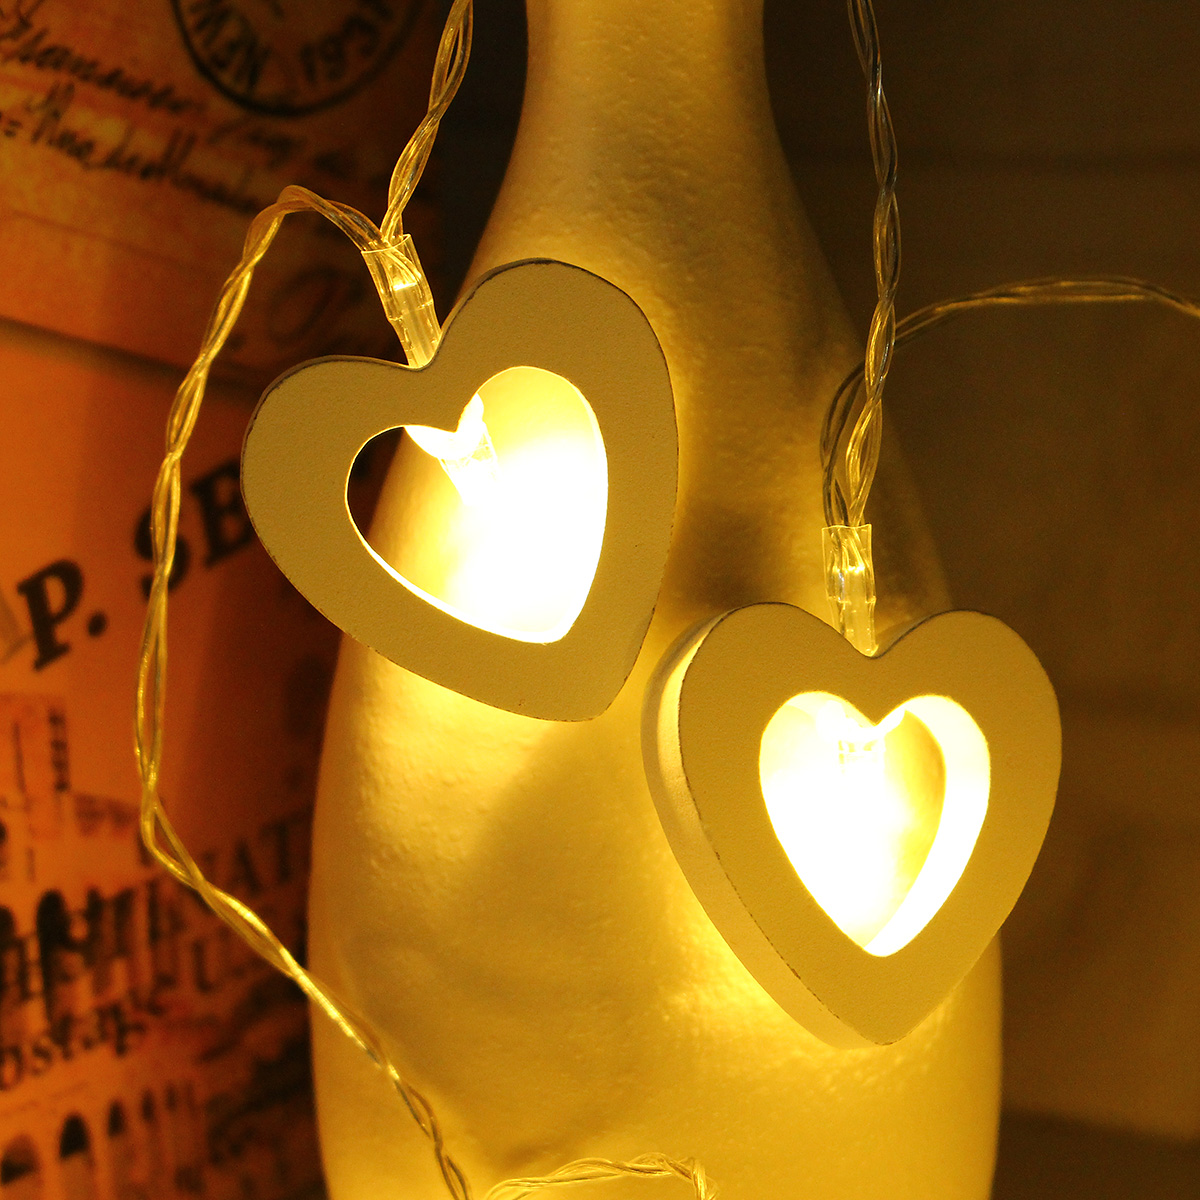 18M-03W-Wooden-Heart-Shape-Battery-Powered-10LED-Fairy-String-Light-for-Christmas-Home-Party-Decor-D-1630337-7